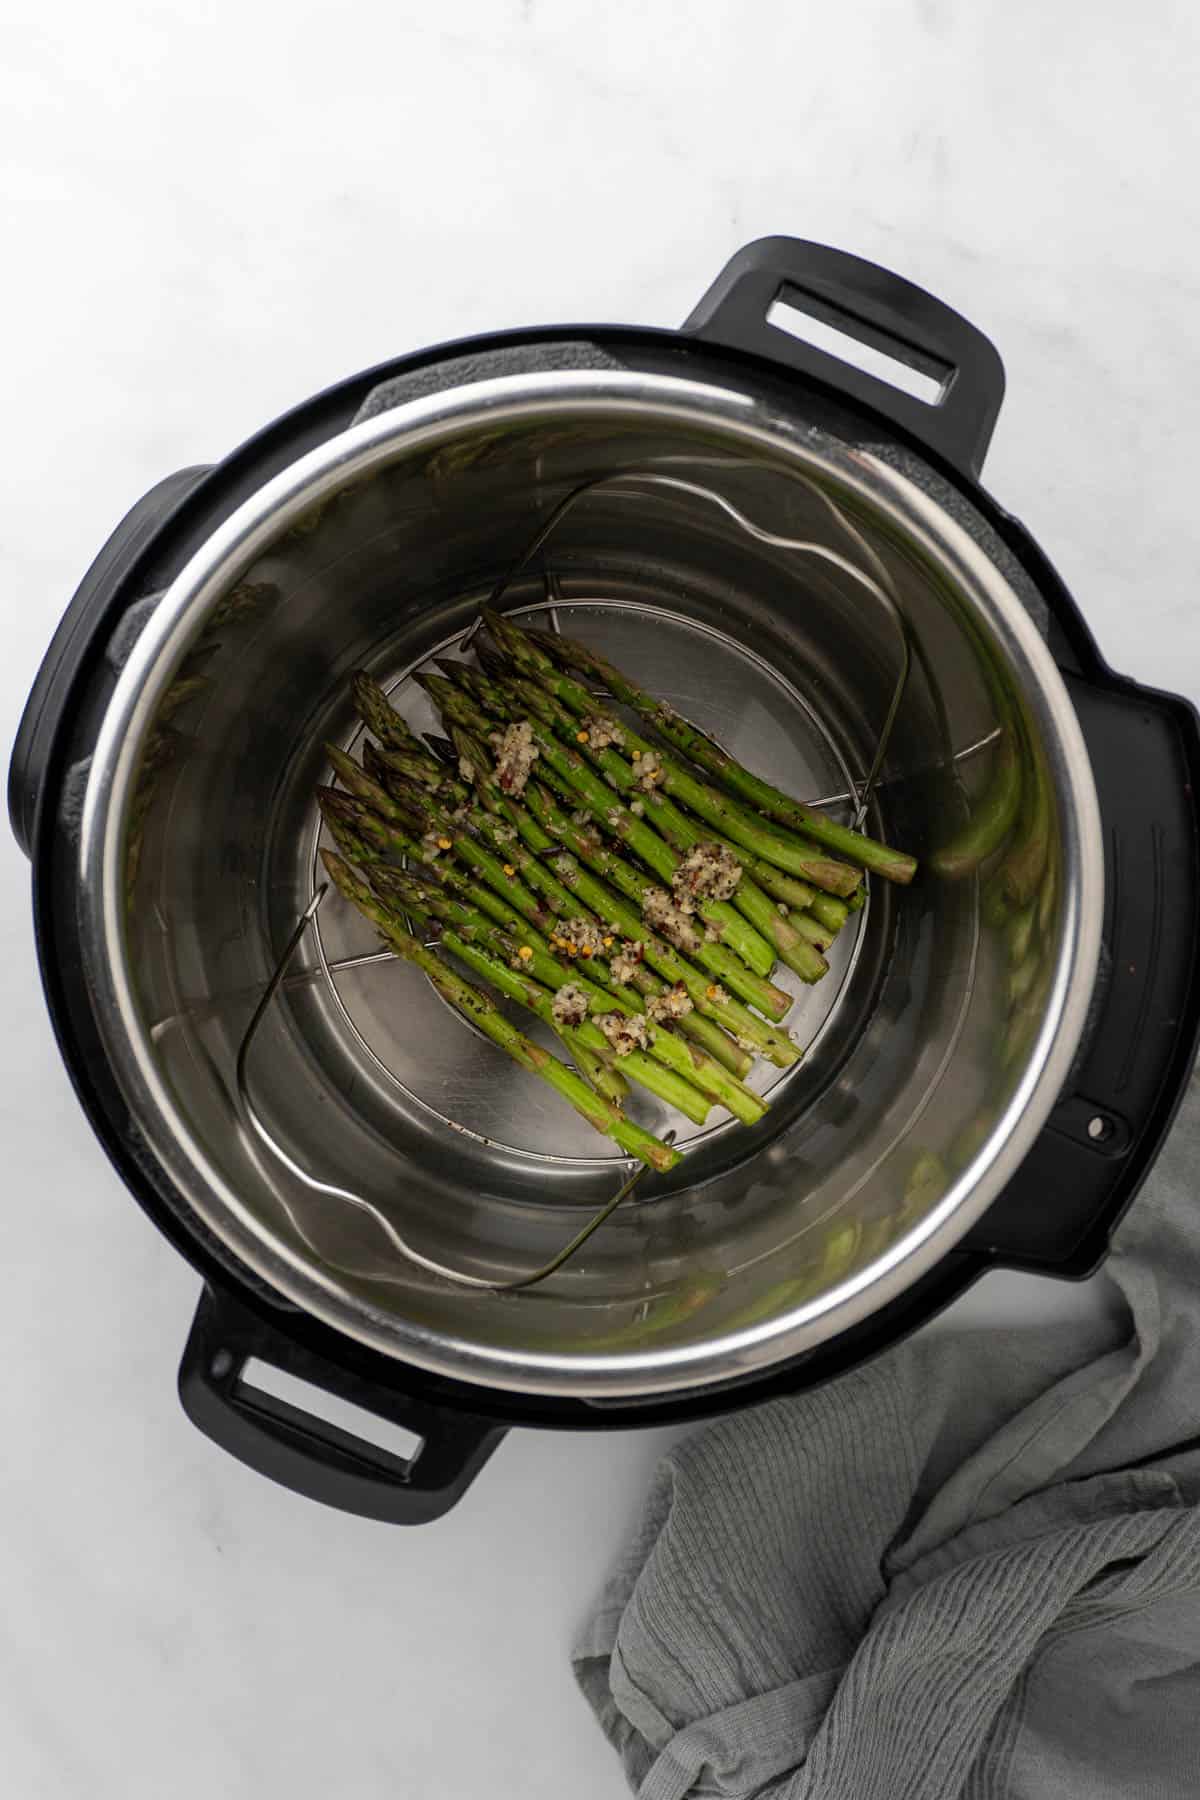 seasoned asparagus spears in the Instant Pot, on the metal trivet, before being cooked